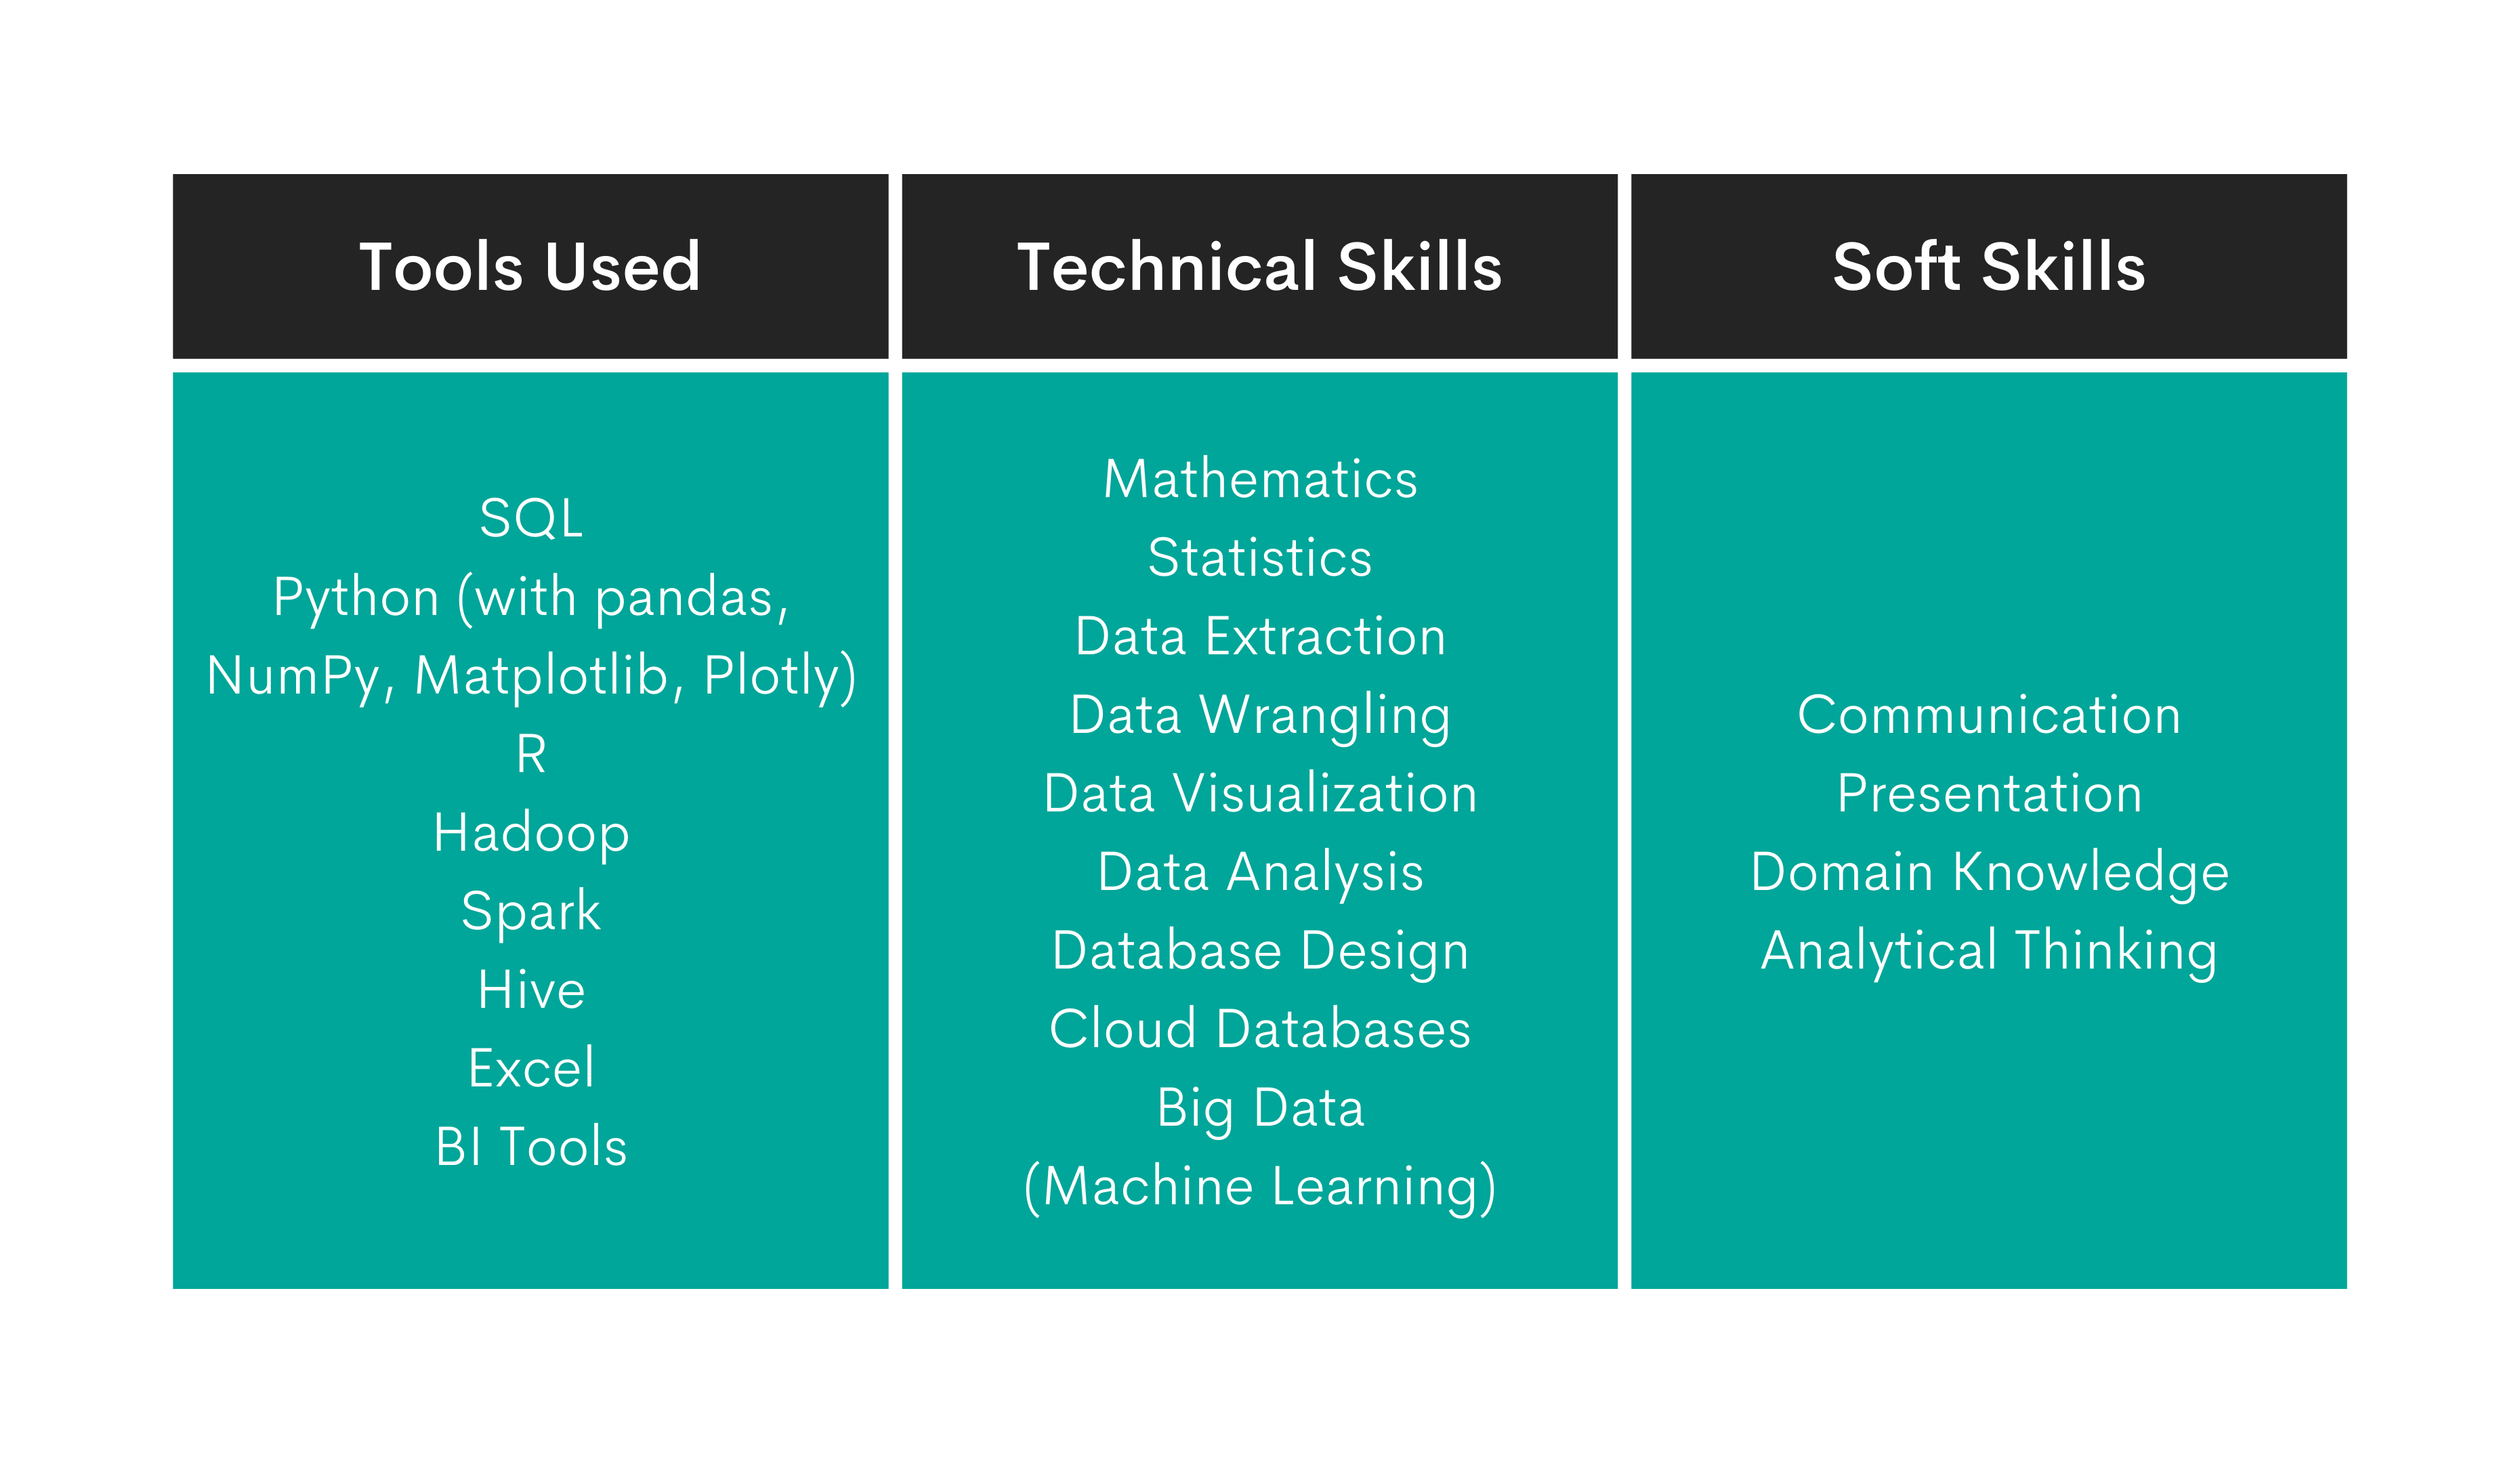 What Are the Skills Required for a Data Analyst